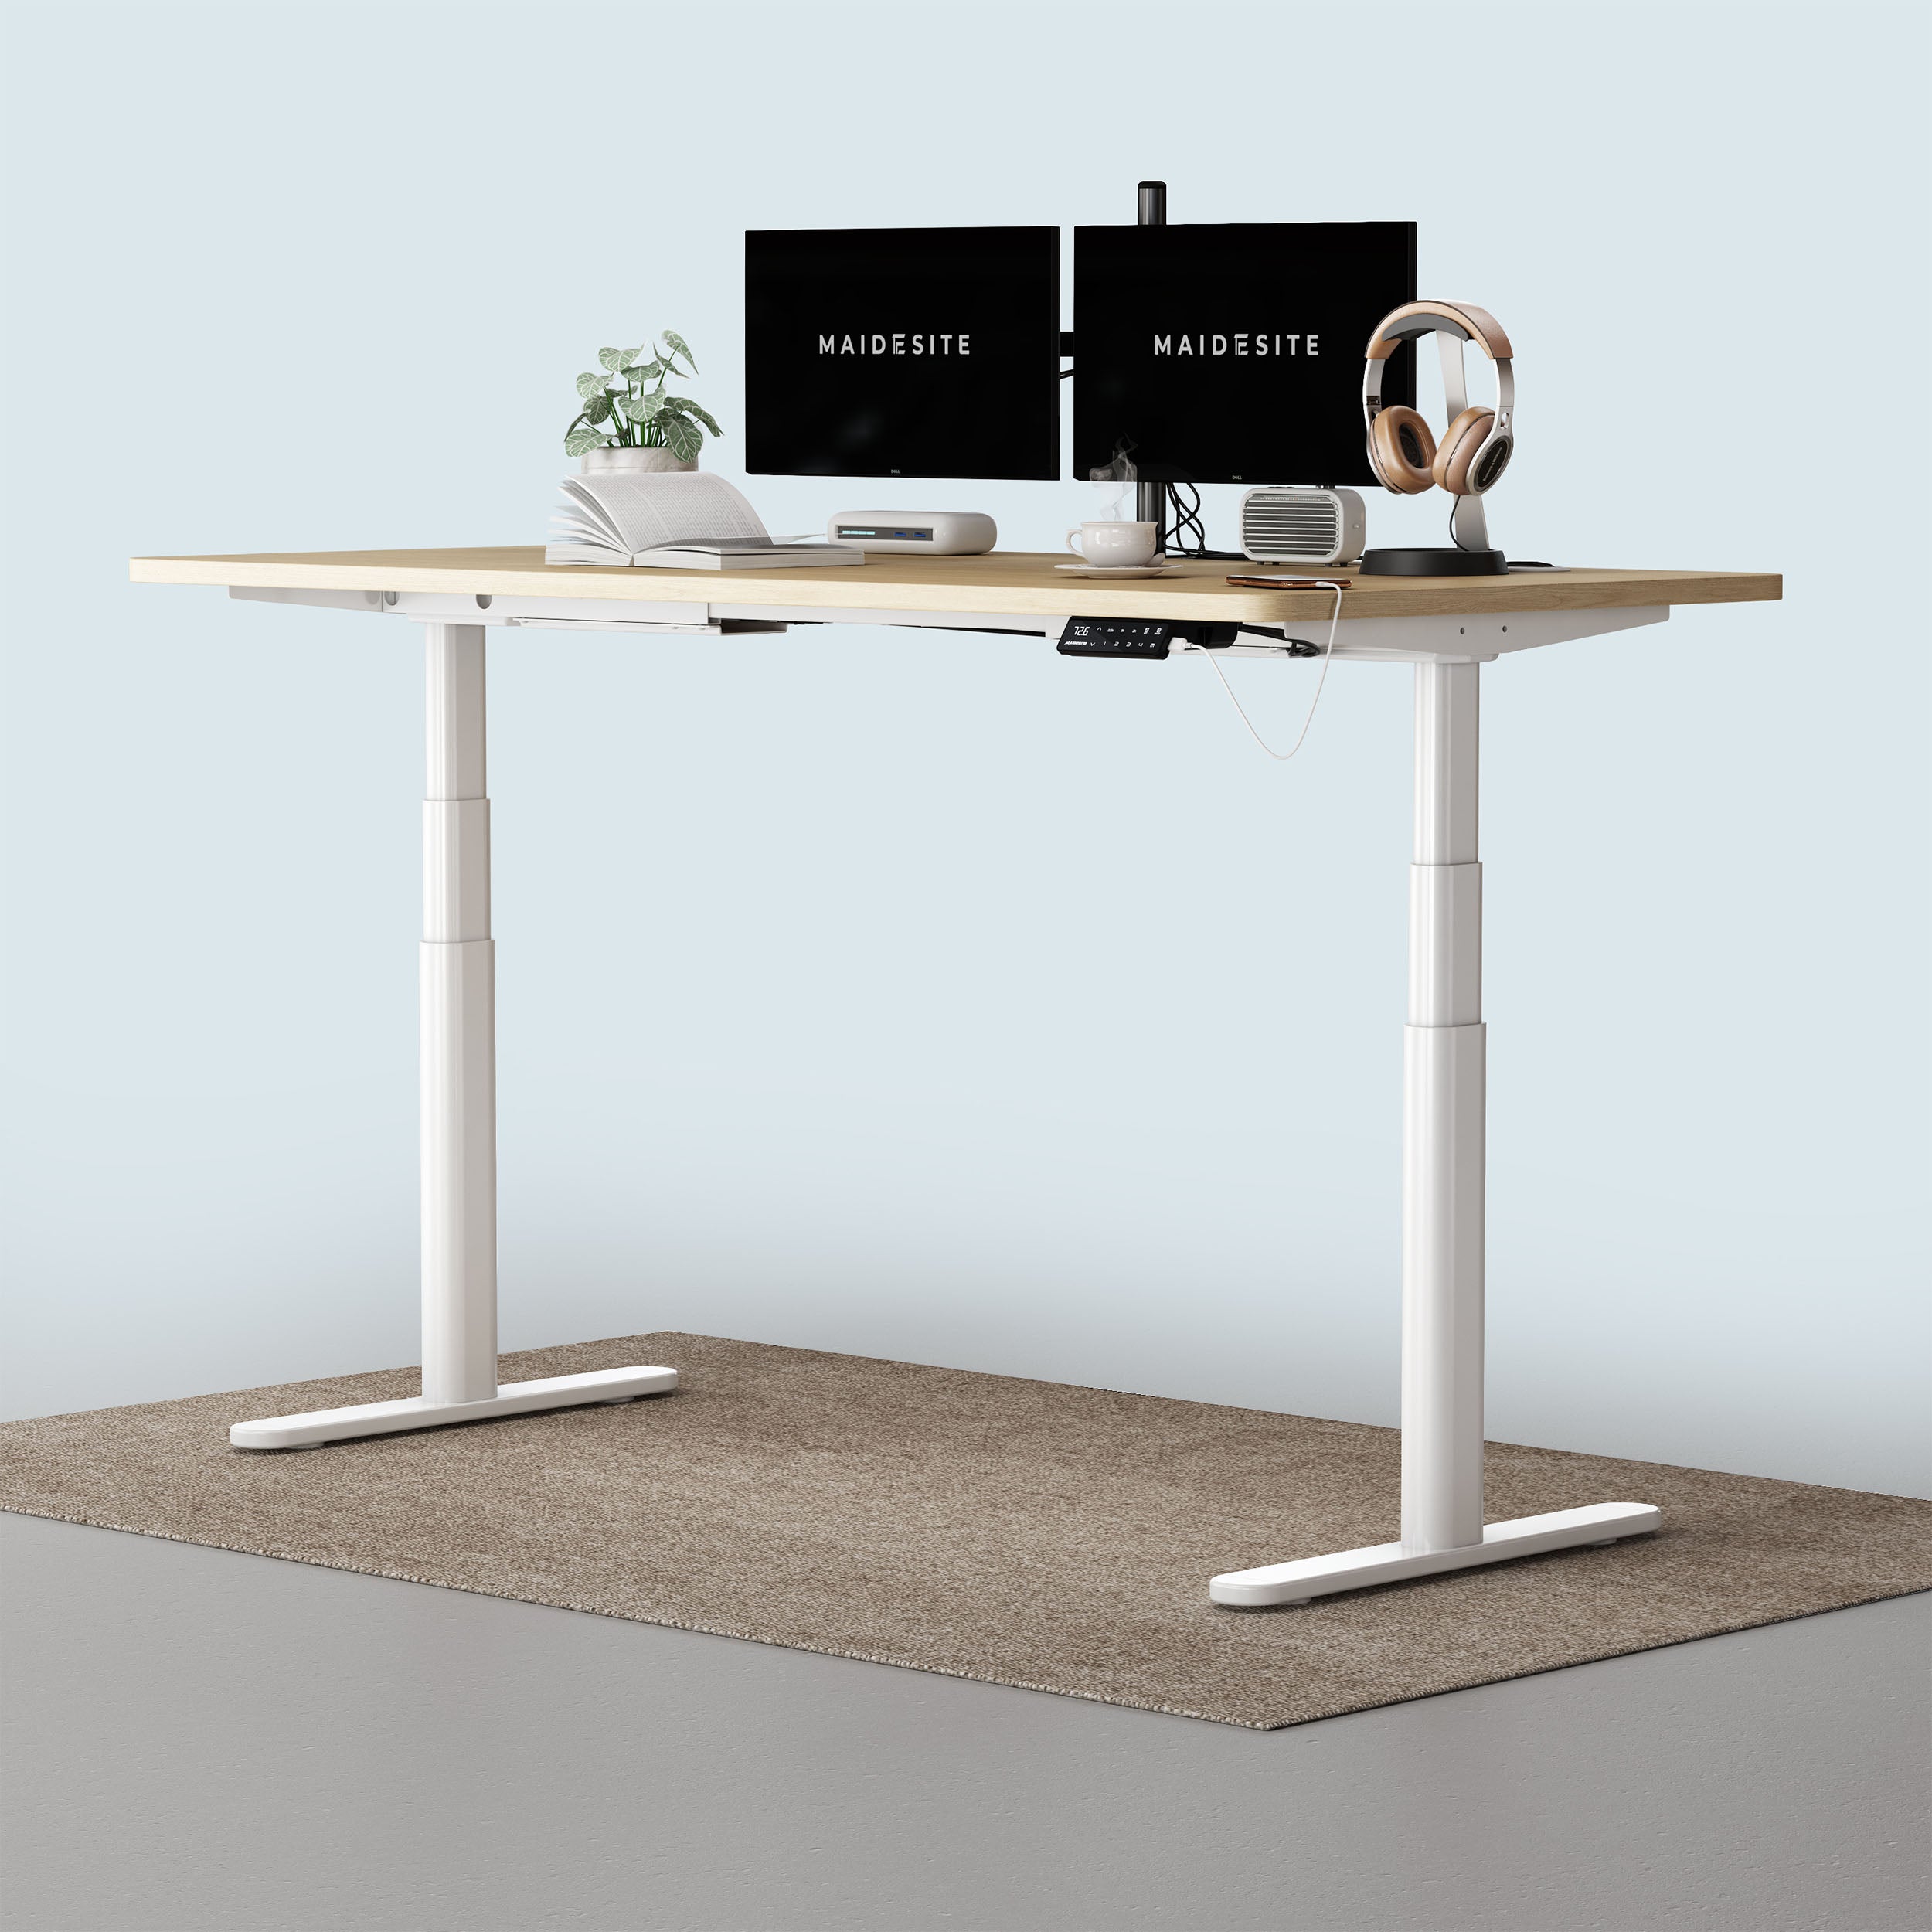 TH2 Pro Plus - Electric height adjustable desk white frame with oak top for home office